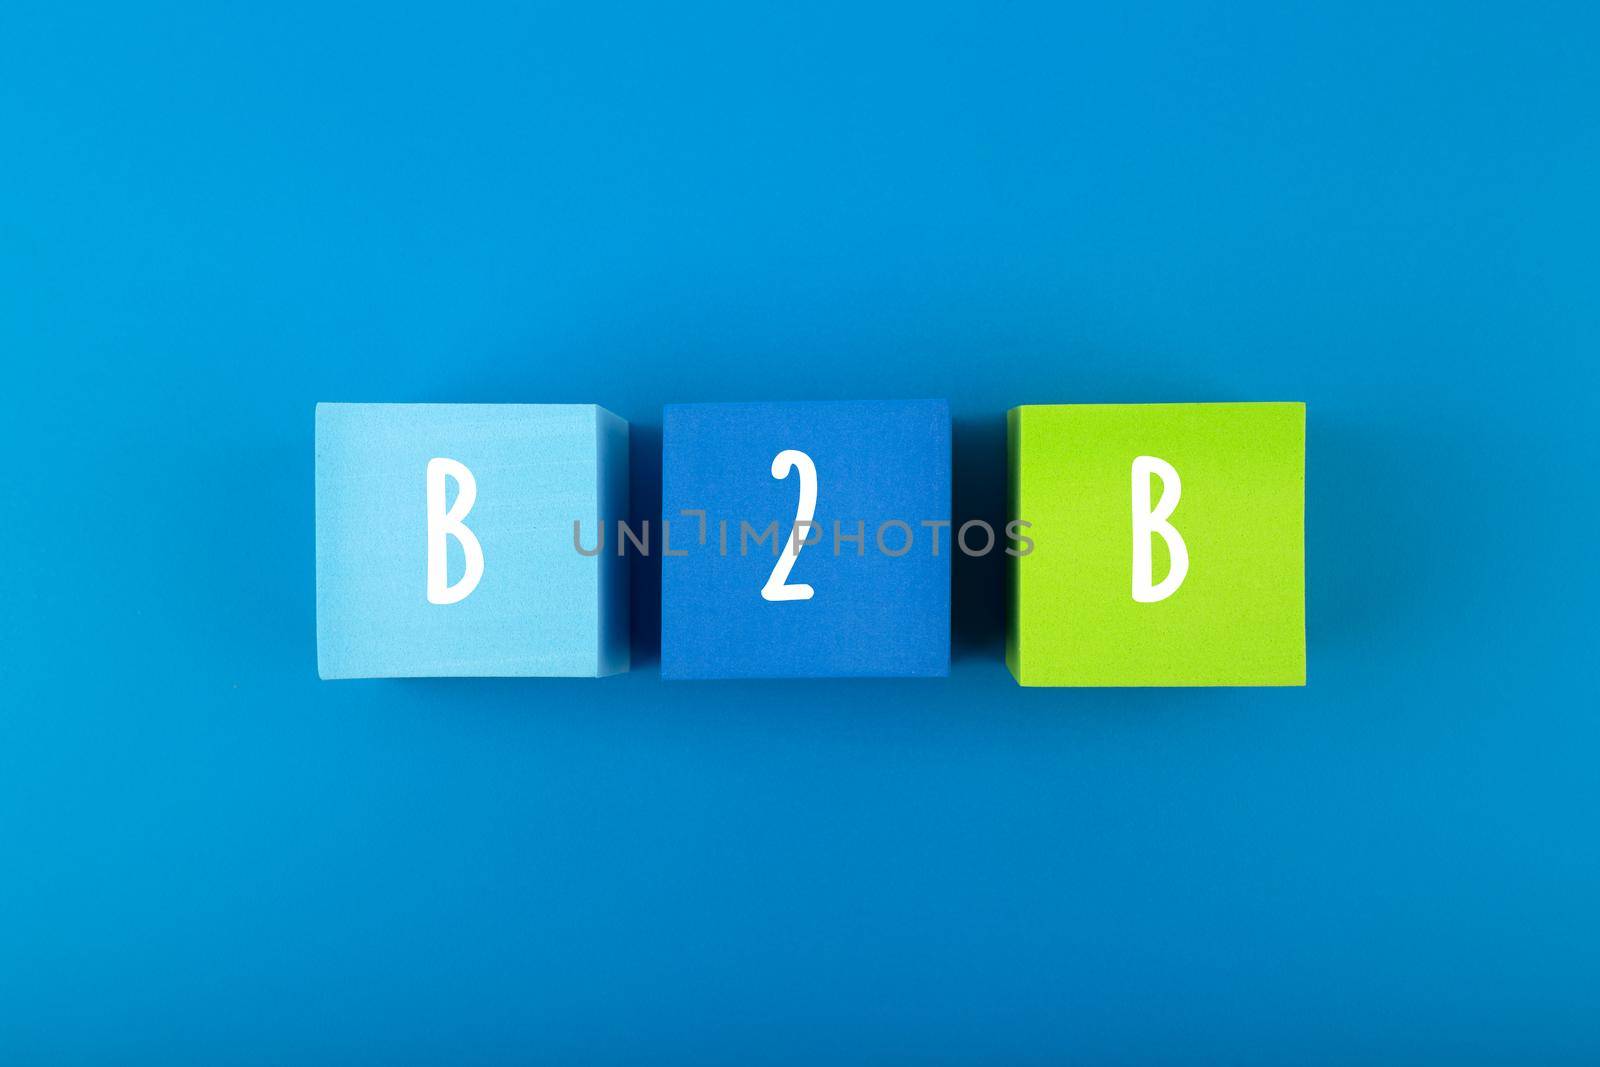 B2B minimal commercial marketing business concept. B2B letters written on multicolored cubes in a row against dark blue background